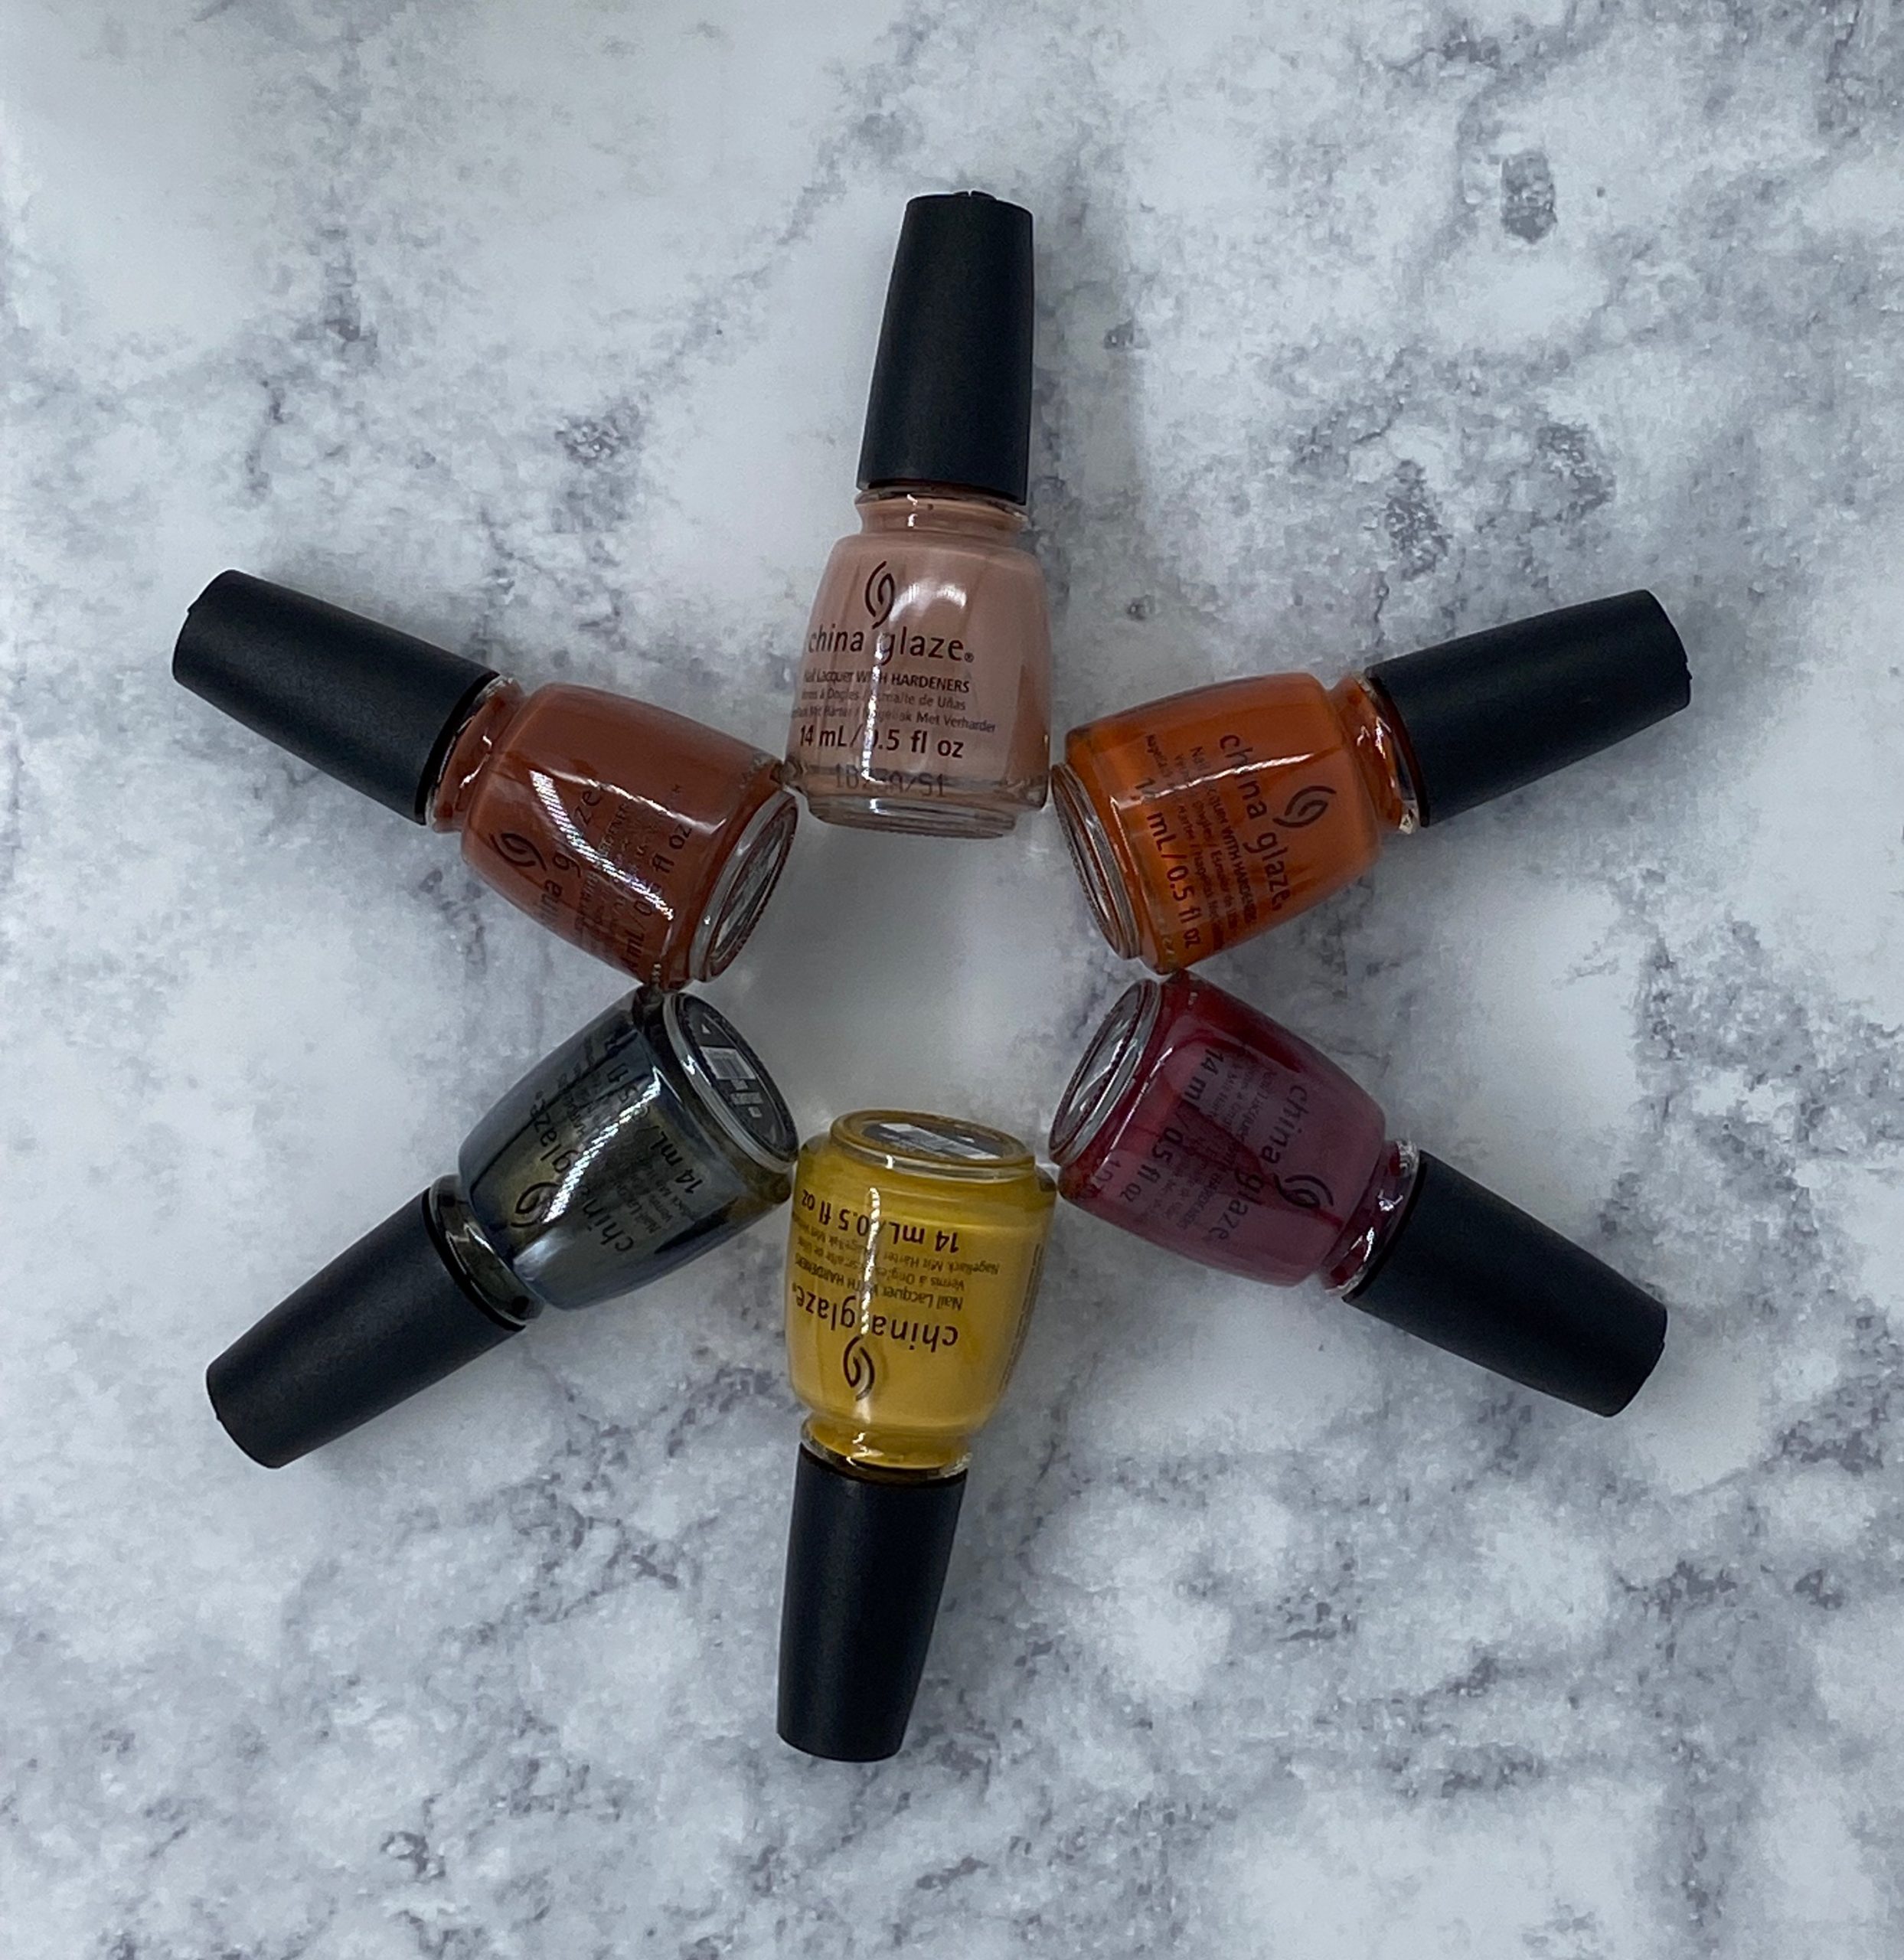 China Glaze Autumn Spice Fall 2021 Collection Review